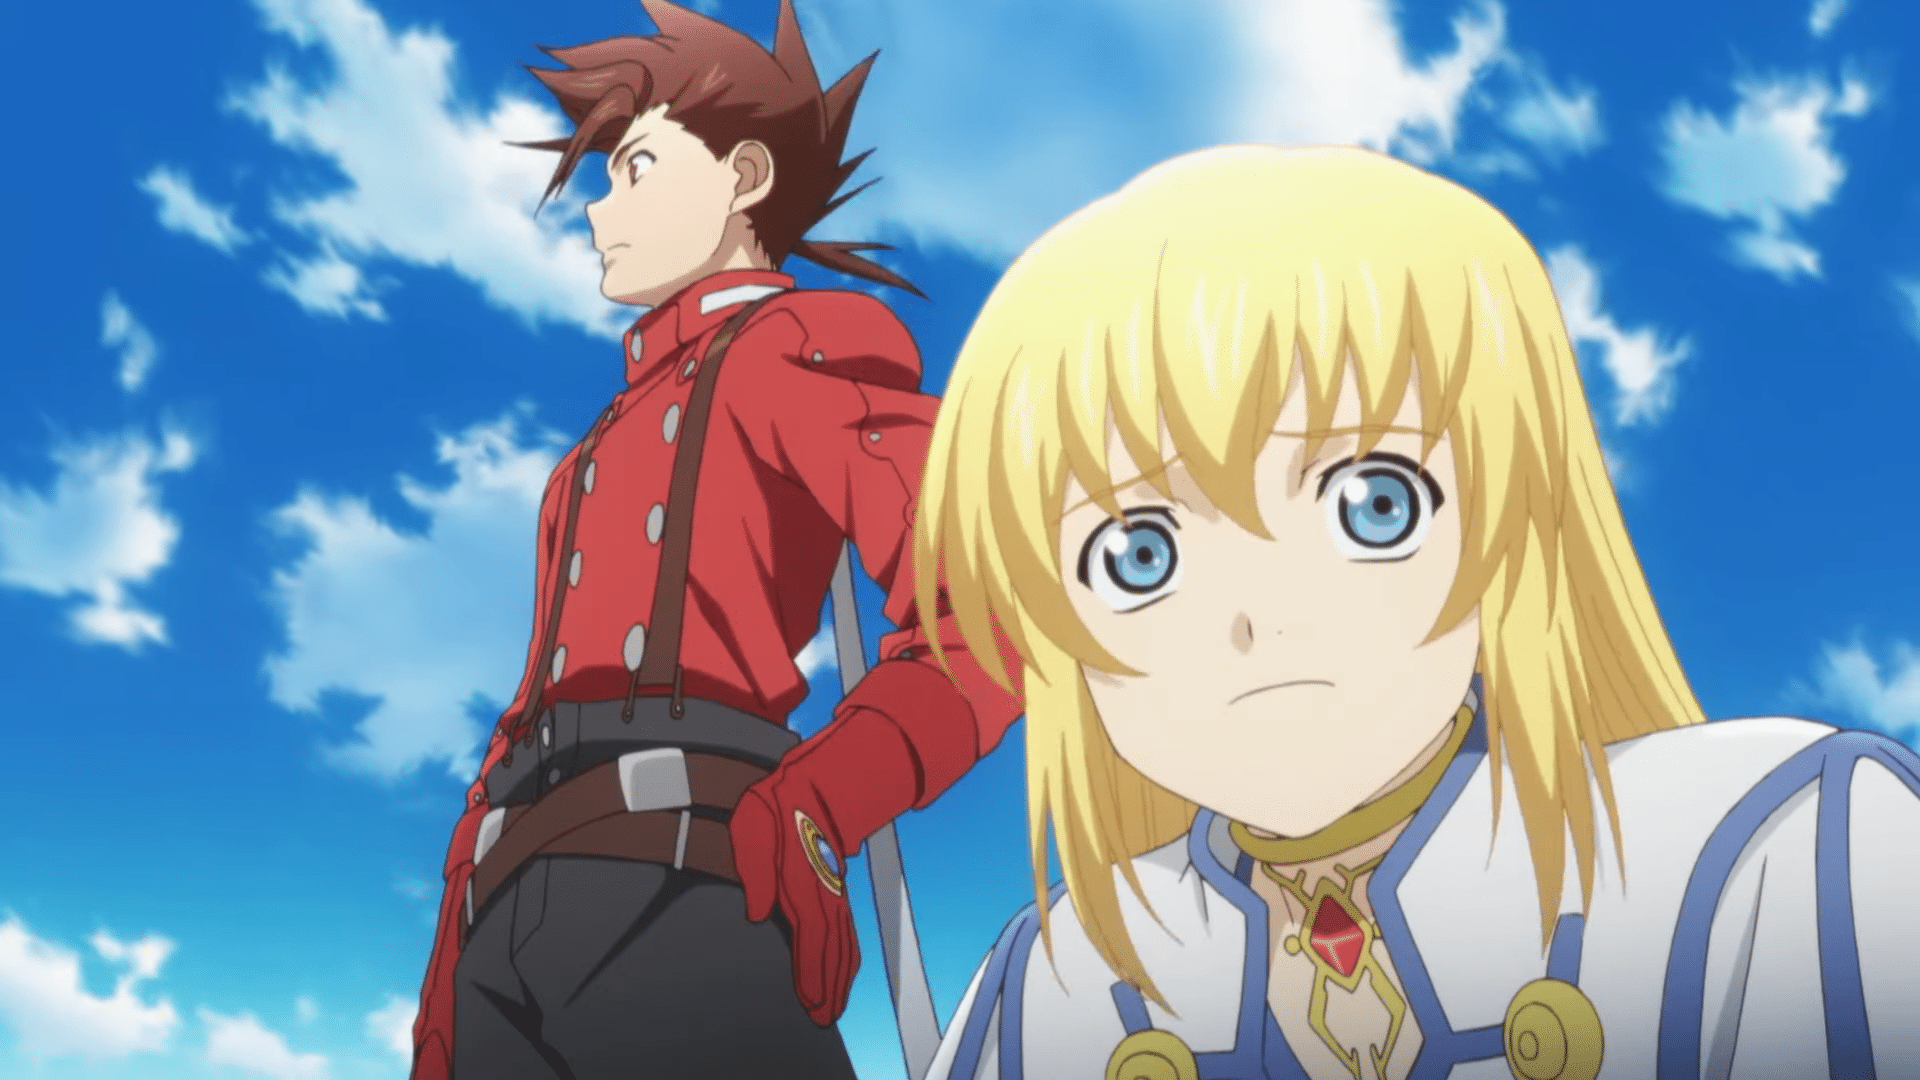 Tales of Symphonia Anime Leaving YouTube This Month